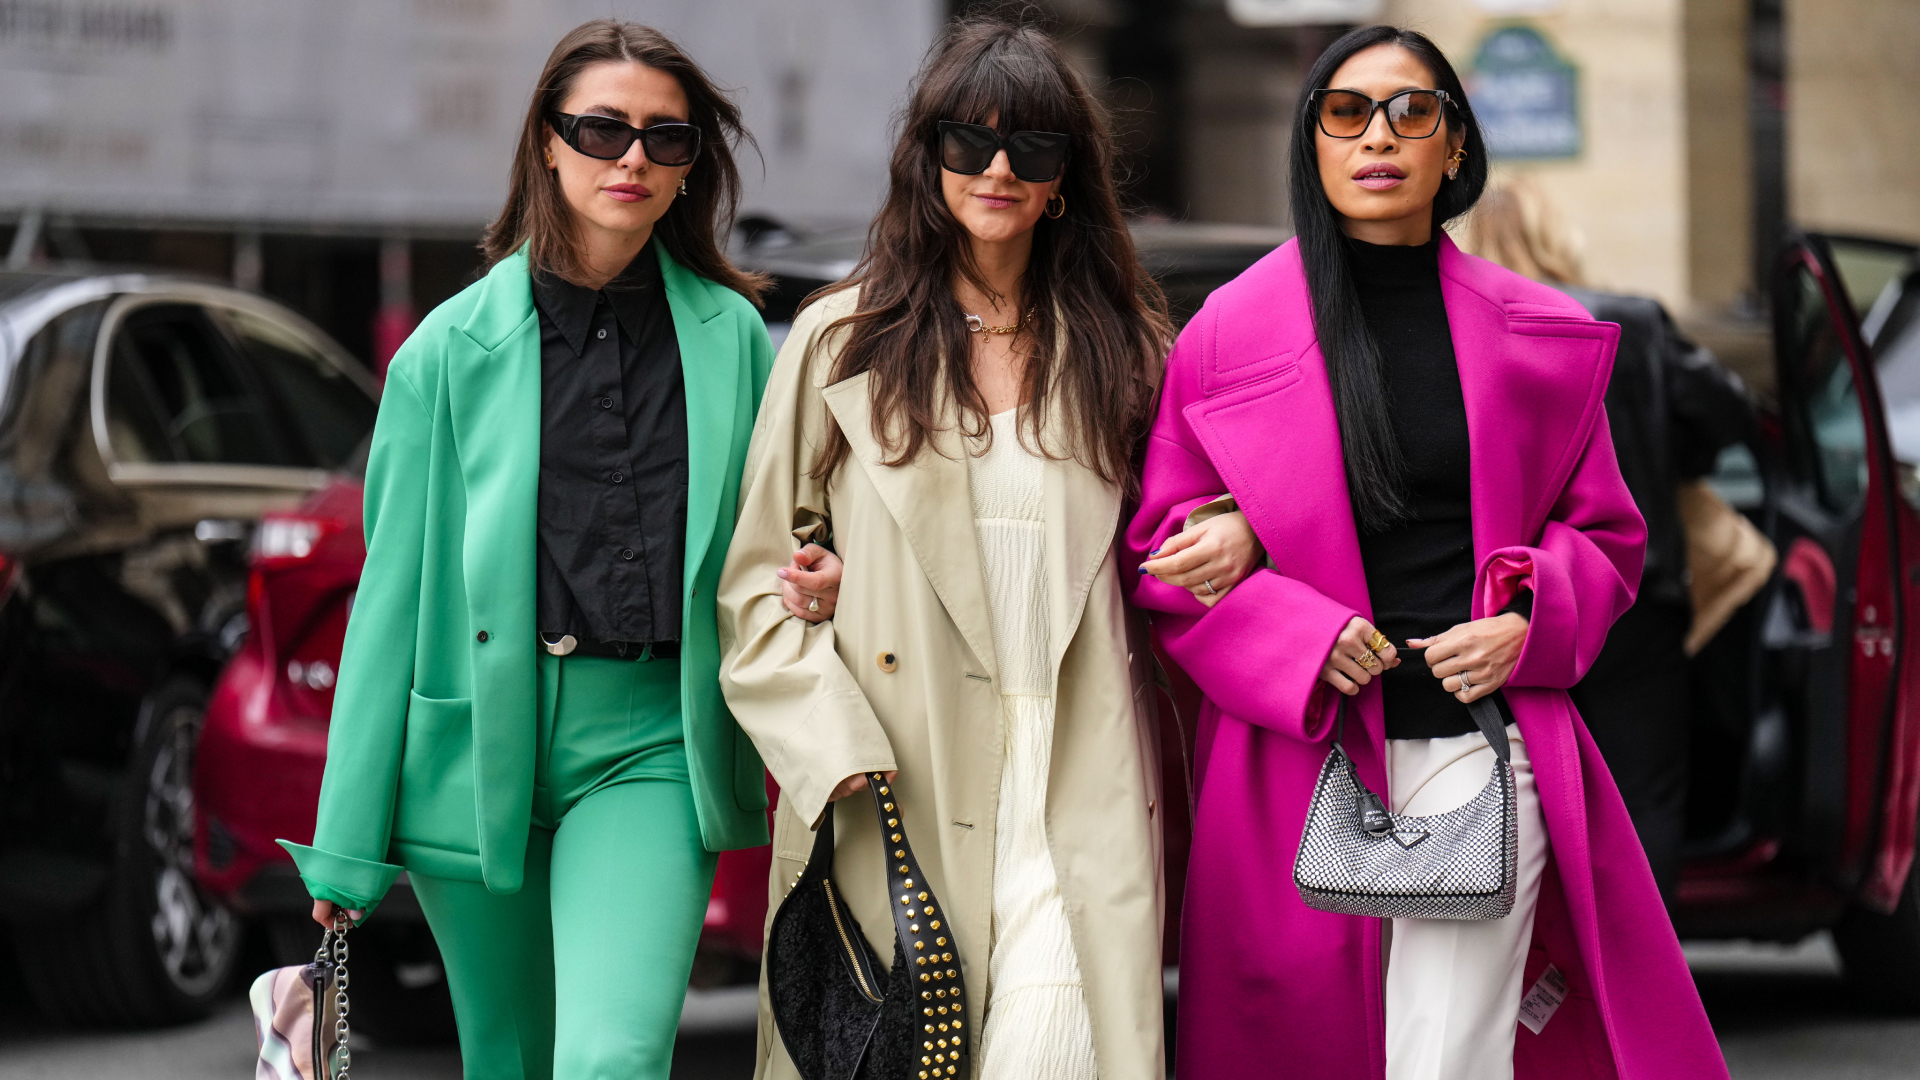 The 7 Types of Coats Everyone Should Own, According to Fashion Editors